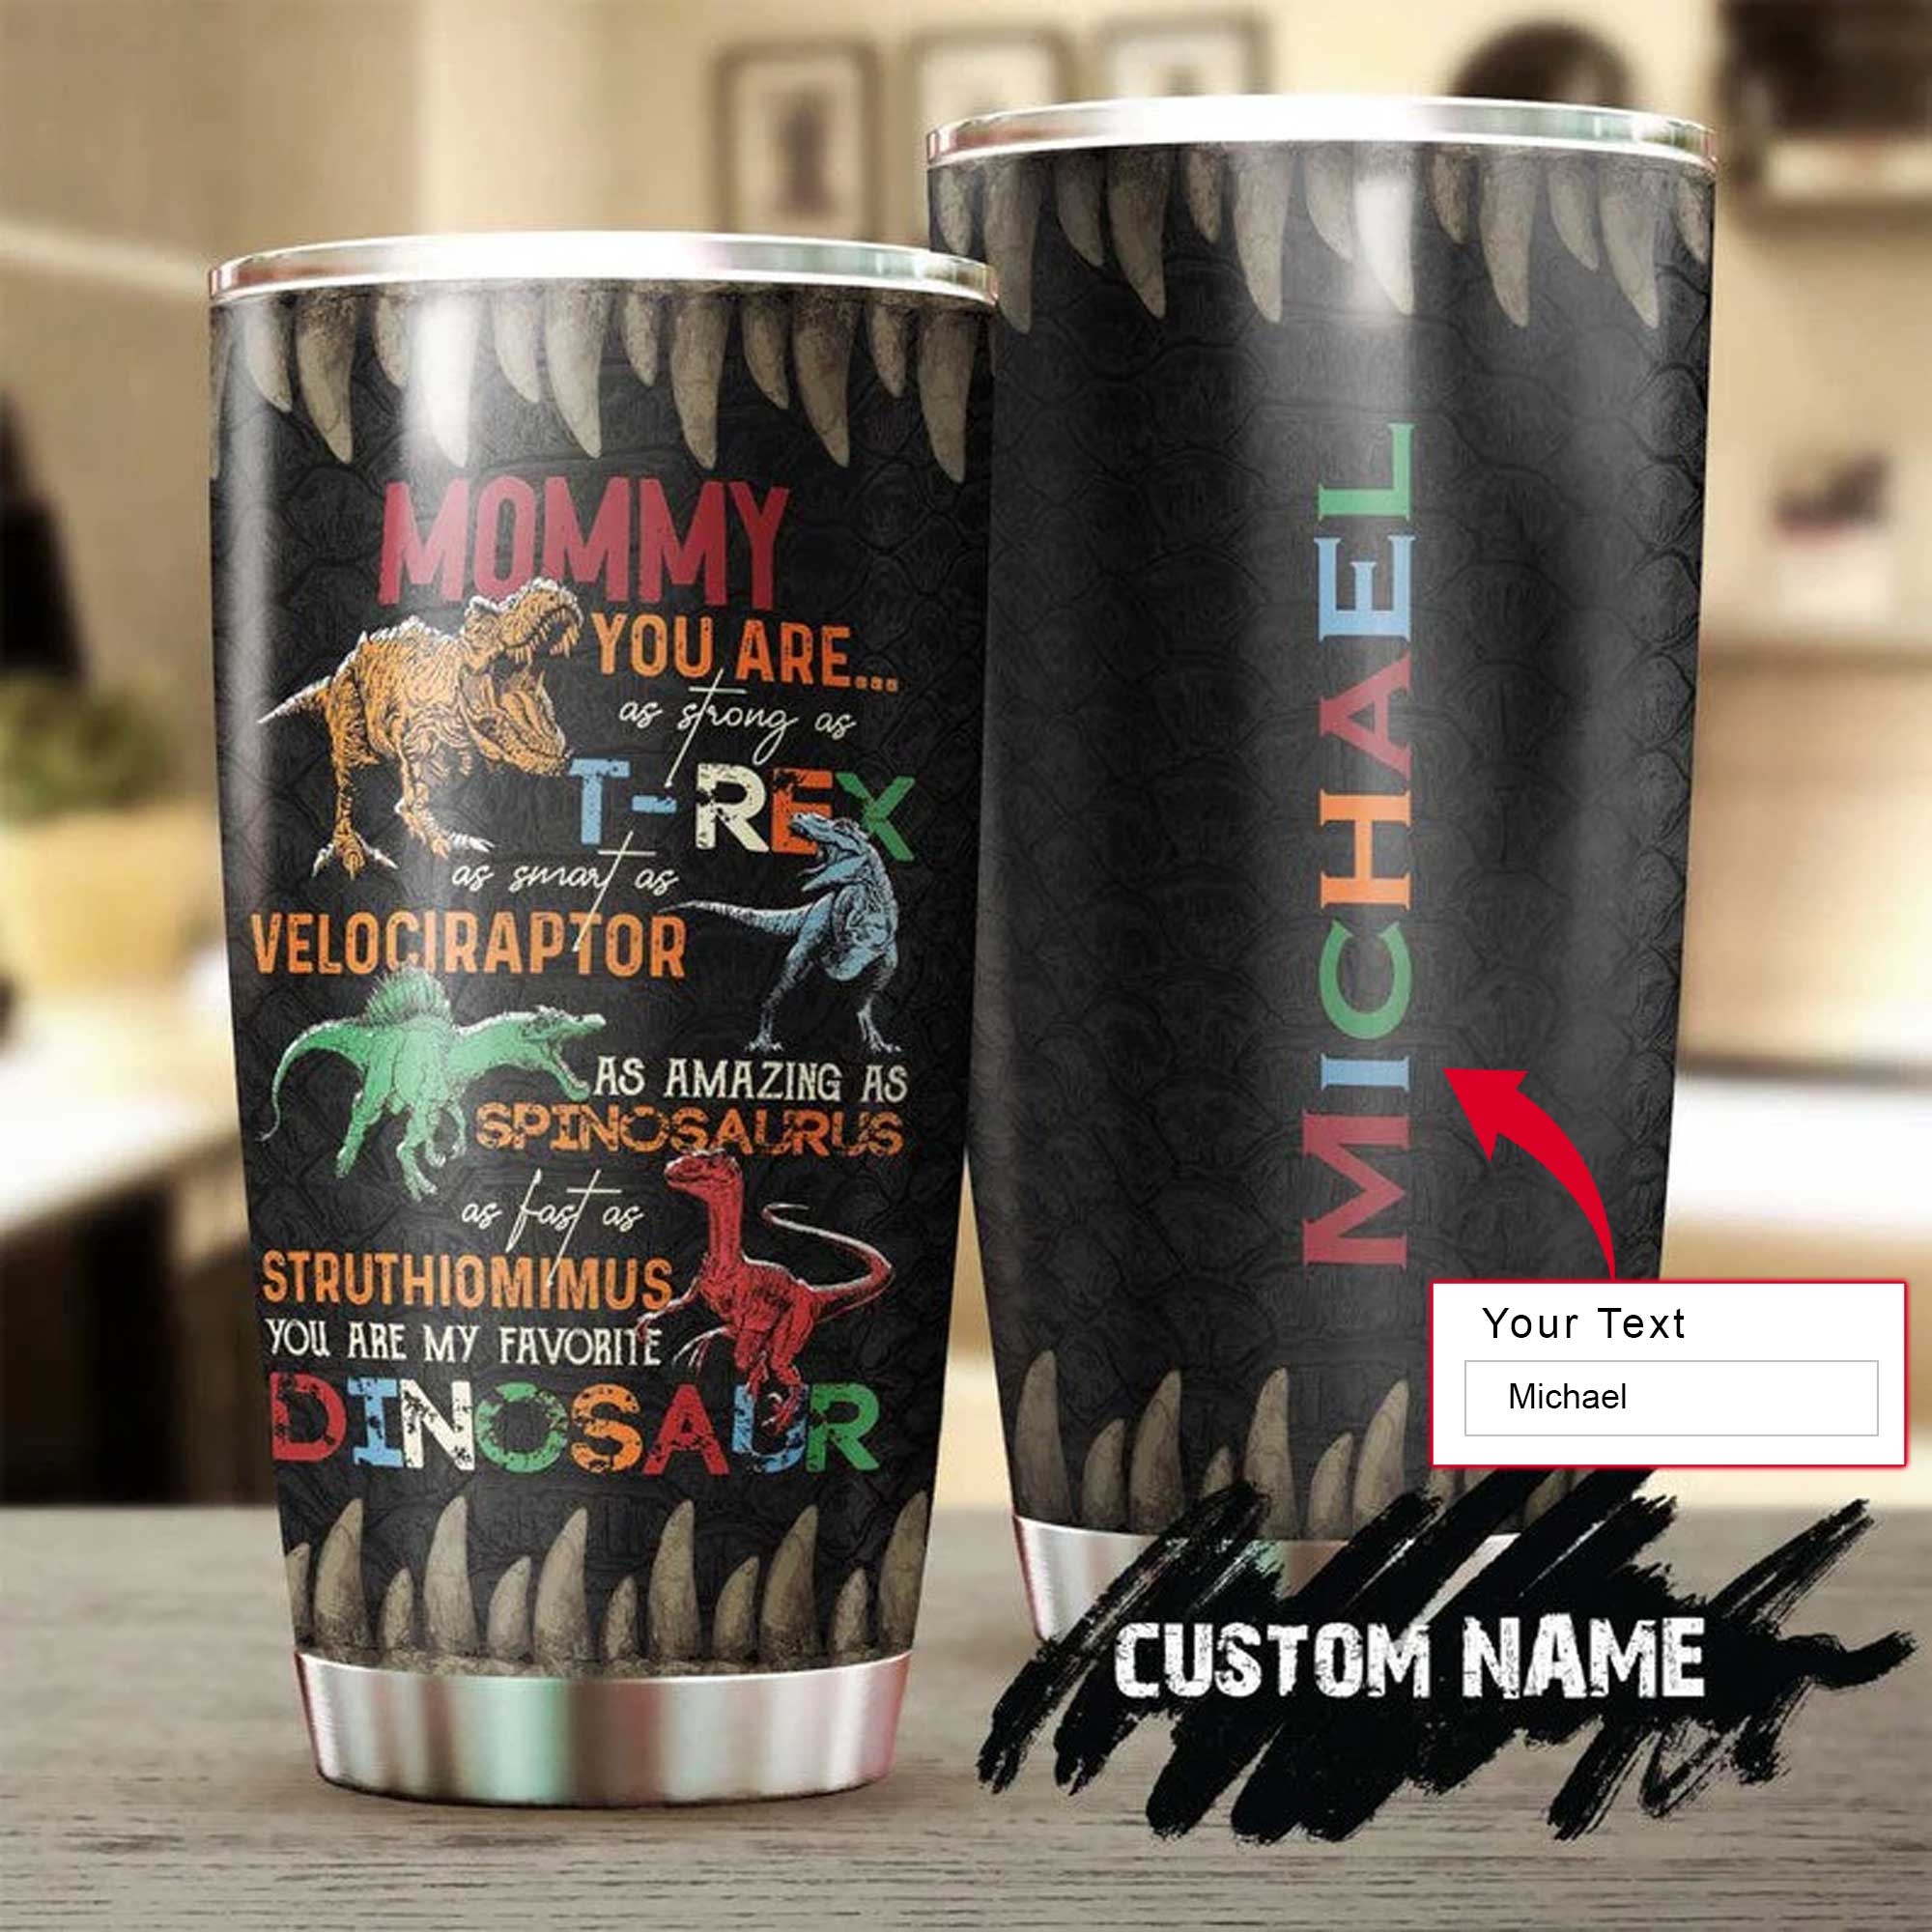 Personalized Mother's Day Gift Tumbler - Custom Gift For Mother's Day, Presents For Mom - Dinosaur Mom You Are As Strong As T-Rex Tumbler